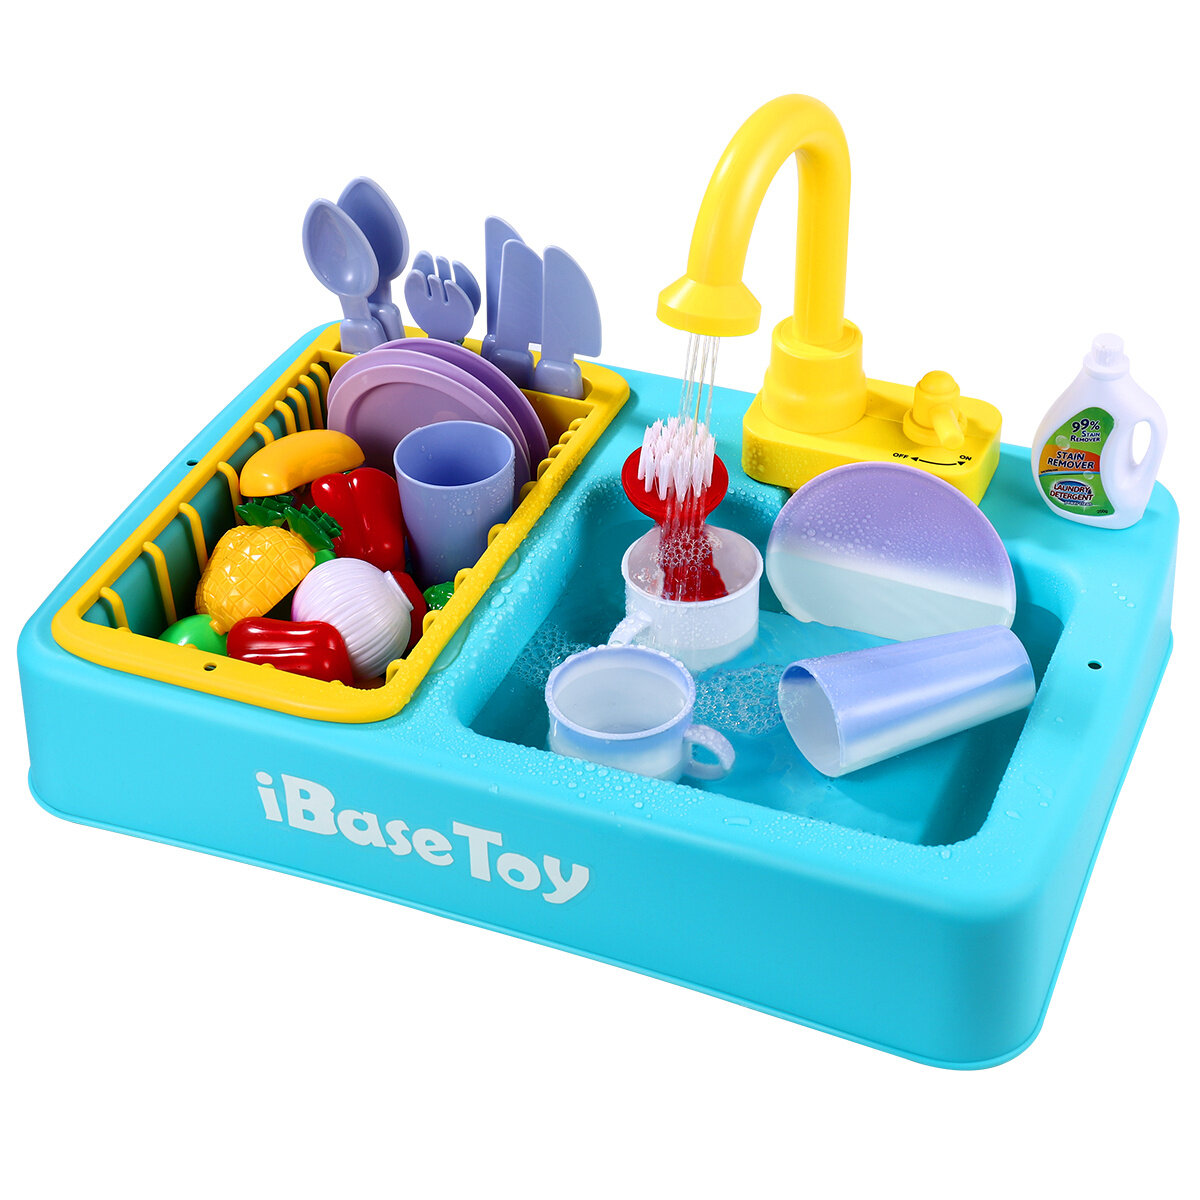 Food Sink Play Electric Circulating Water Play House Boy And Girl Baby Kitchen Sink Toy And Improve Cognition Childrens Dishwasher